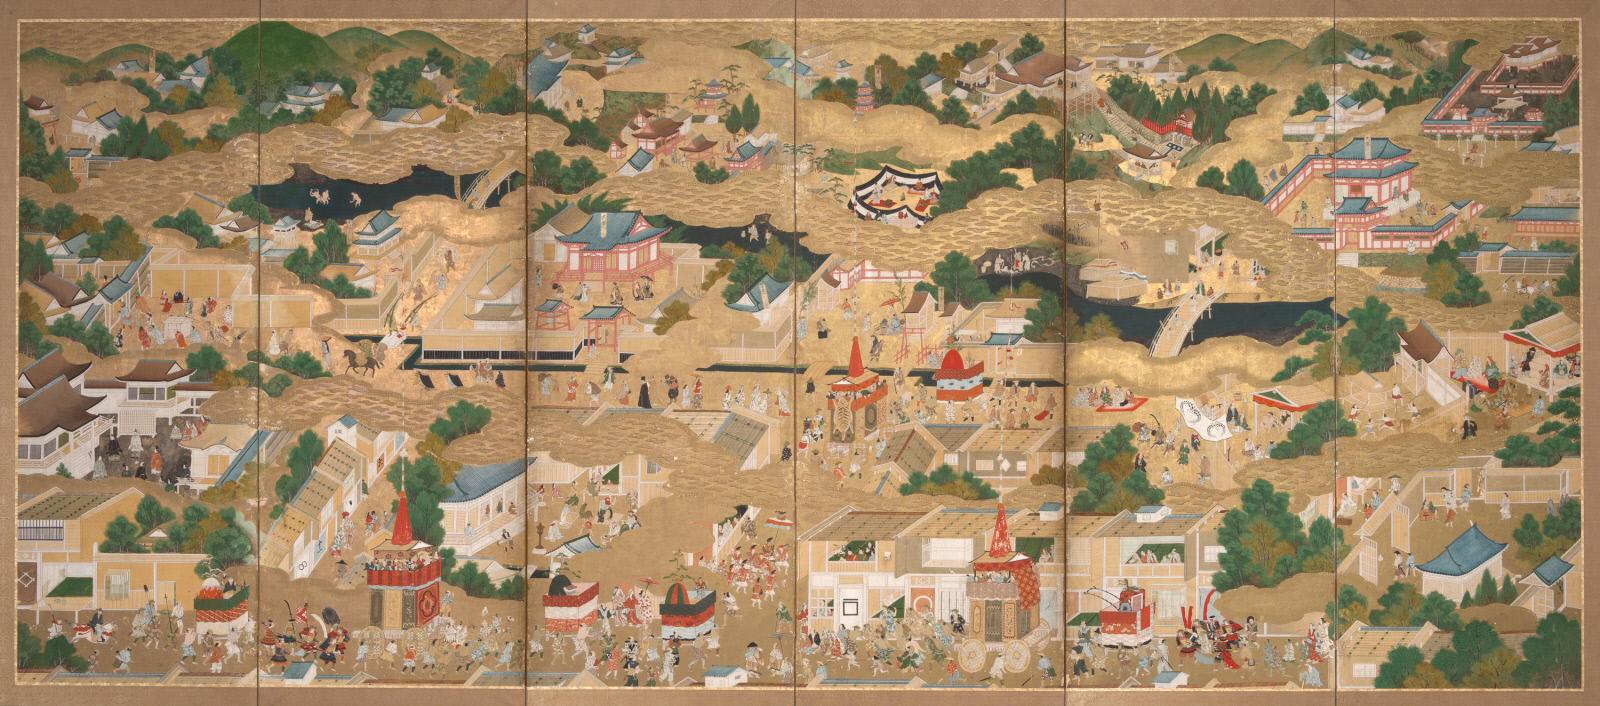 Scenes in and Around Kyoto (Rakuchu Rakugai-zu). Japan, mid-17th century. Ink, pigments, and gold leaf on paper. h. 66 in. (167.6 cm); w. 144 in. (365.8 cm). Purchased with funds provided by the Lillie and Roy Cullen Endowment, 2001.51.a-b.